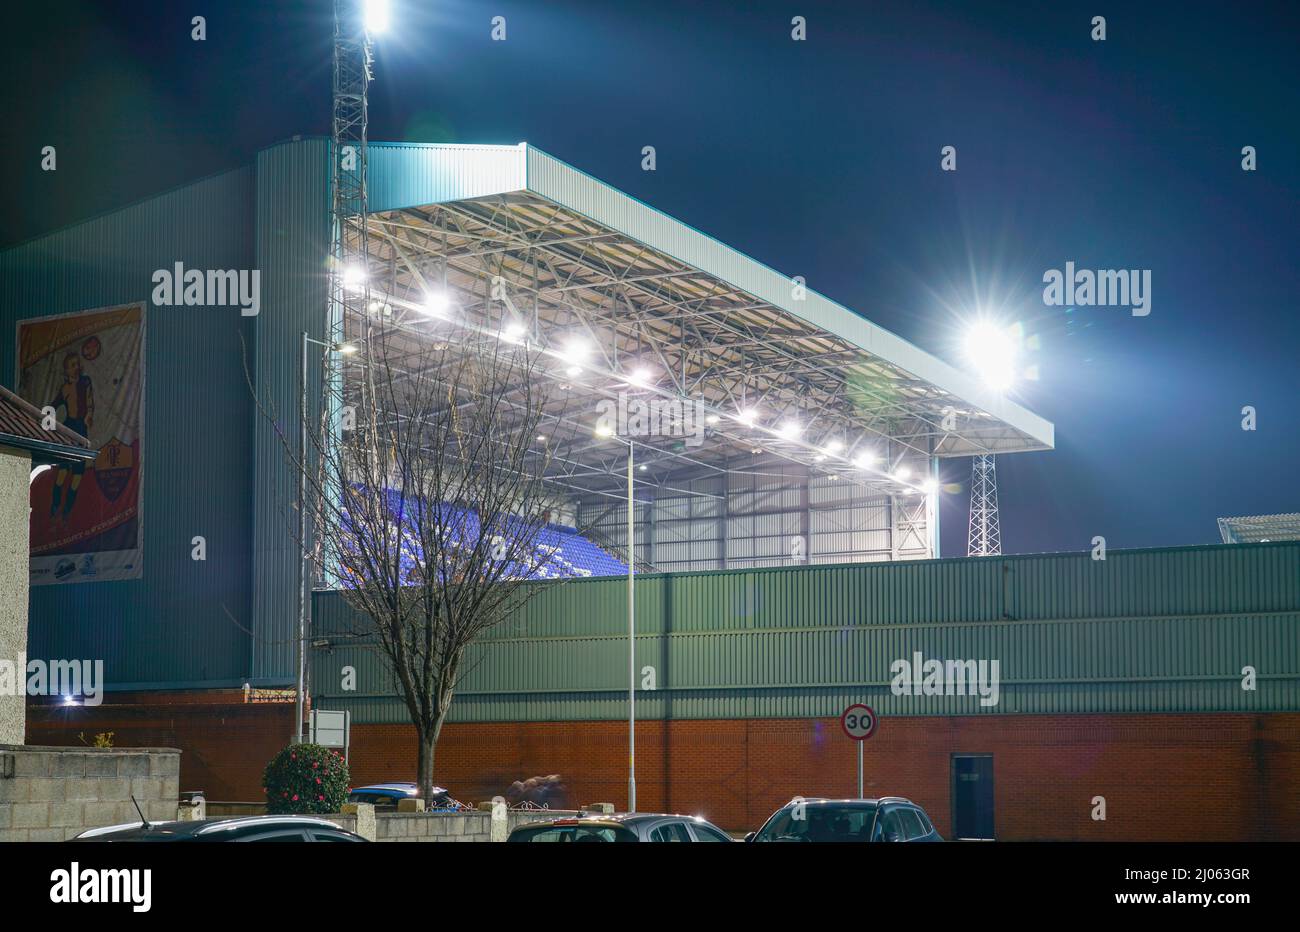 The Bebington Kop stand, at Tranmere Rovers Prenton Park Ground, viewed from Borough Road, Birkenhead. Image taken in March 2022. Stock Photo